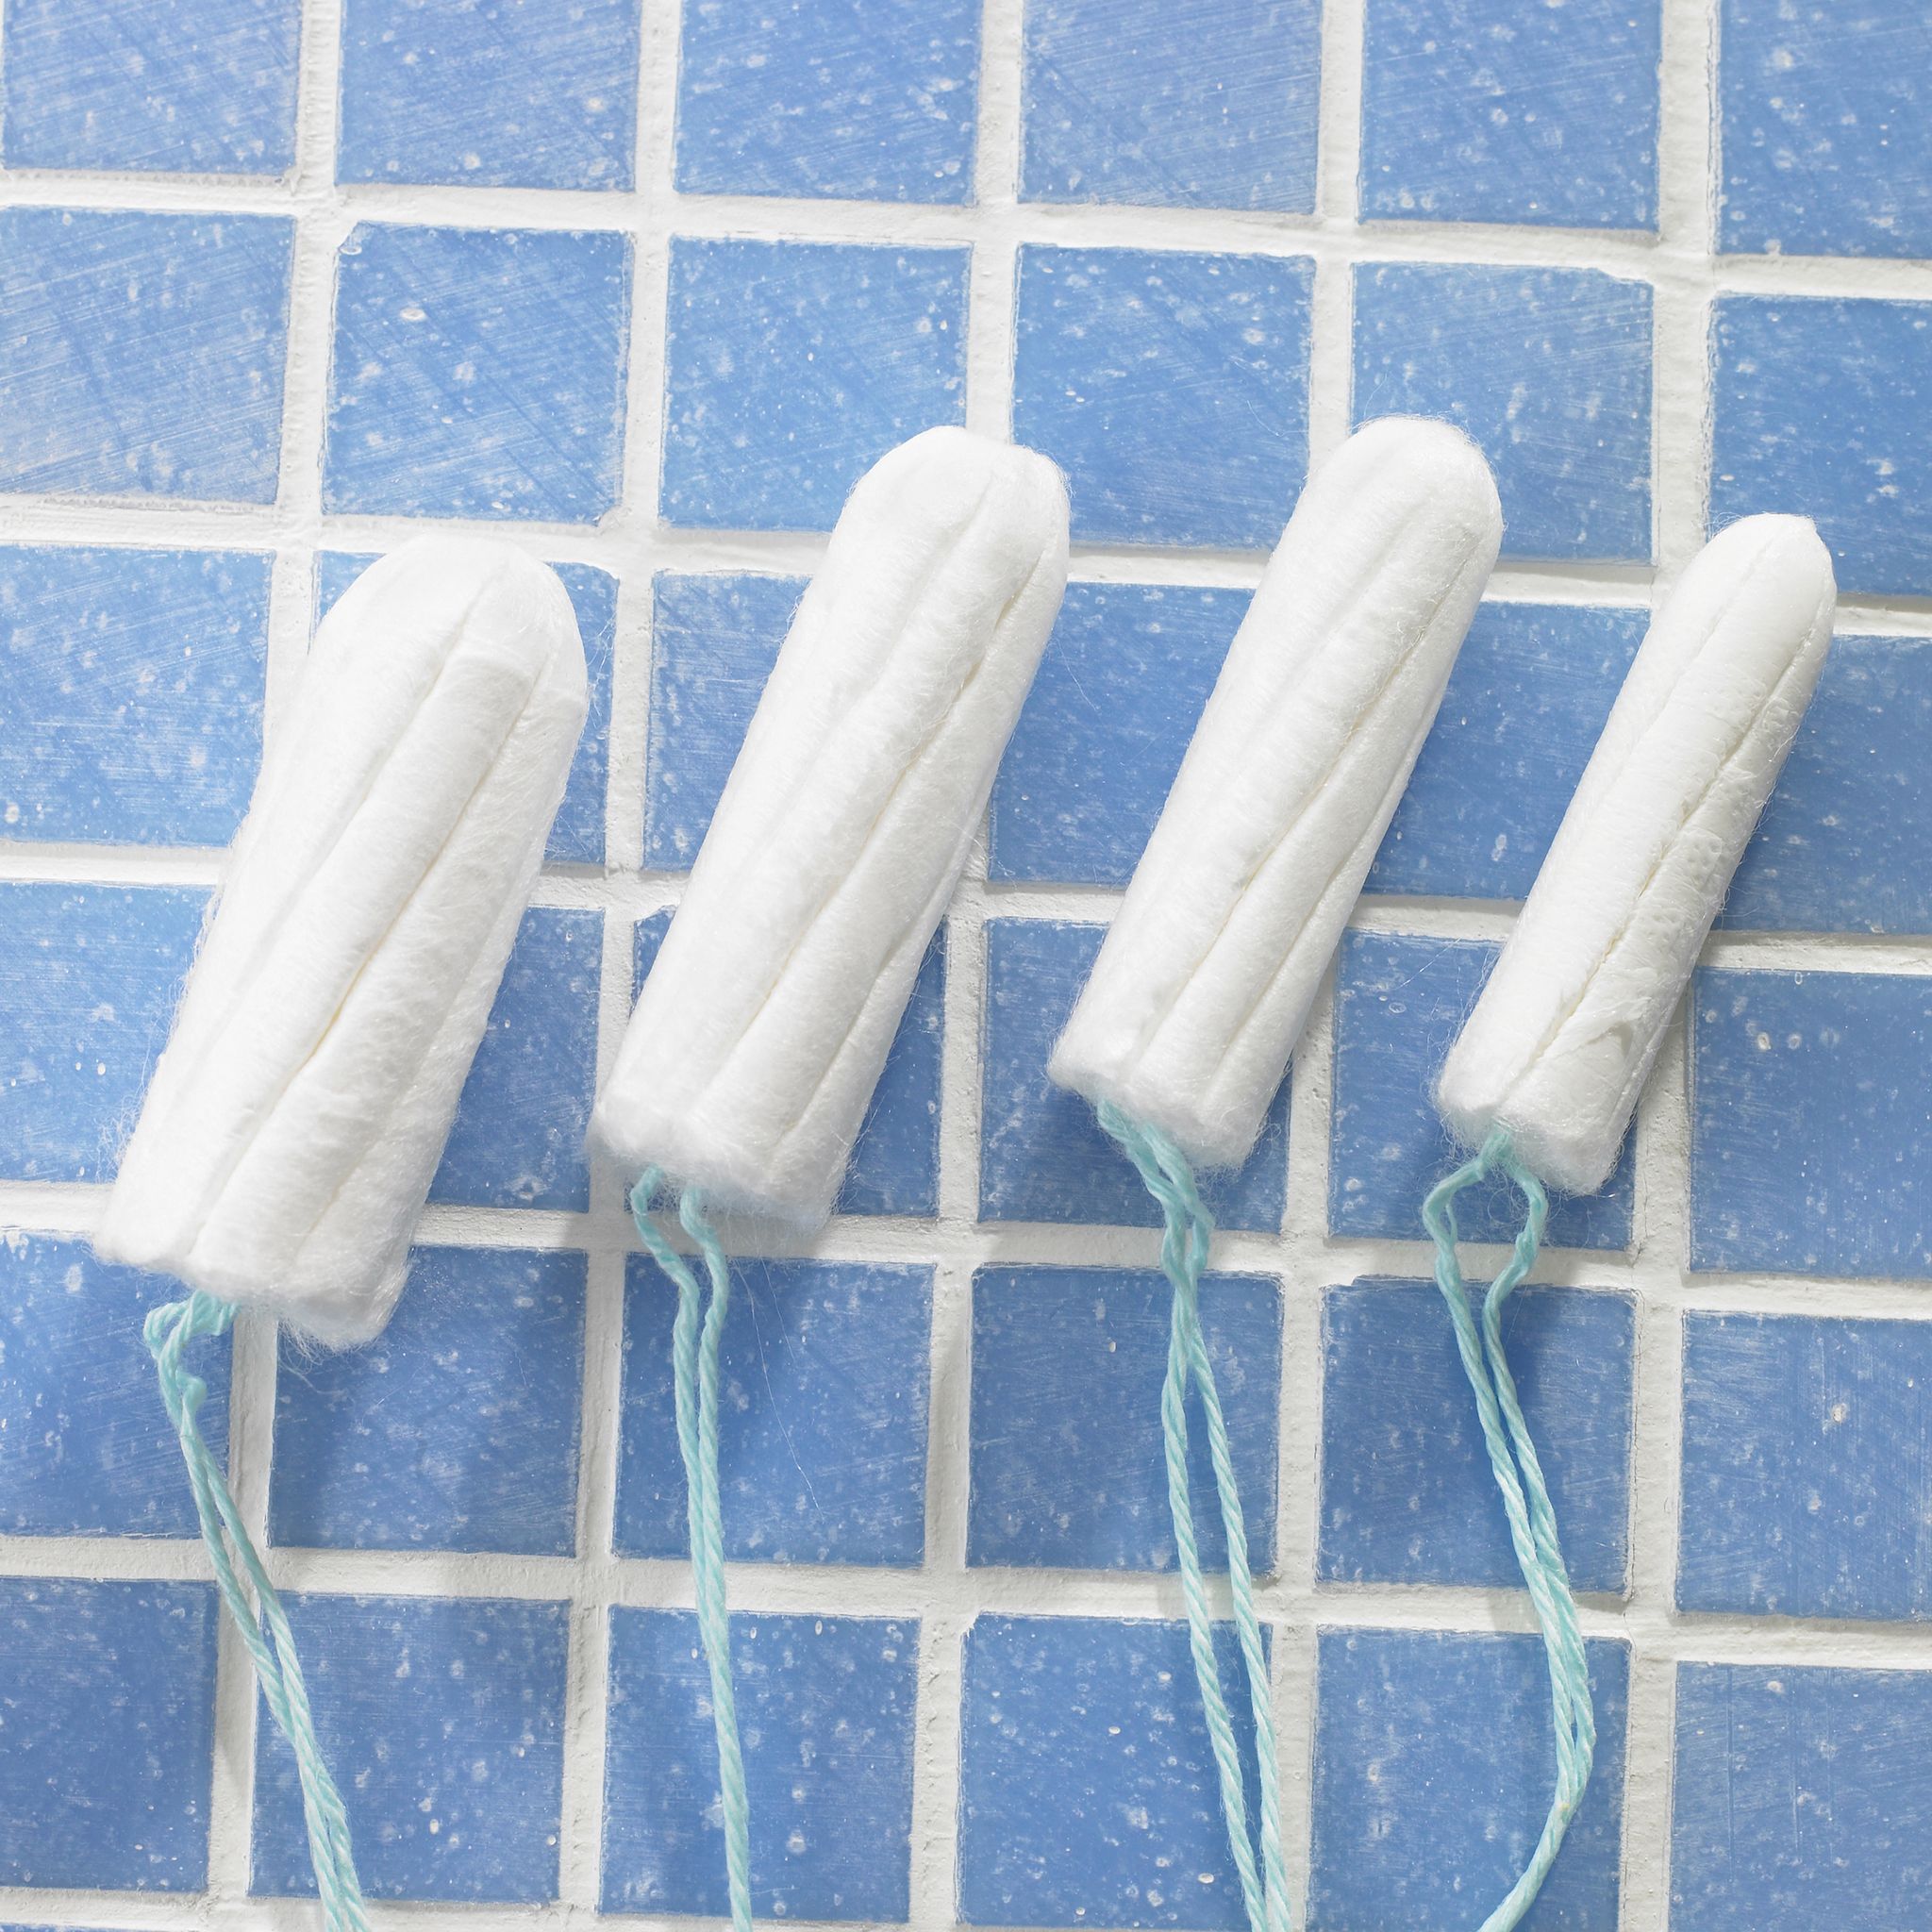 New toxic shock study touts bad tampon advice, expert says